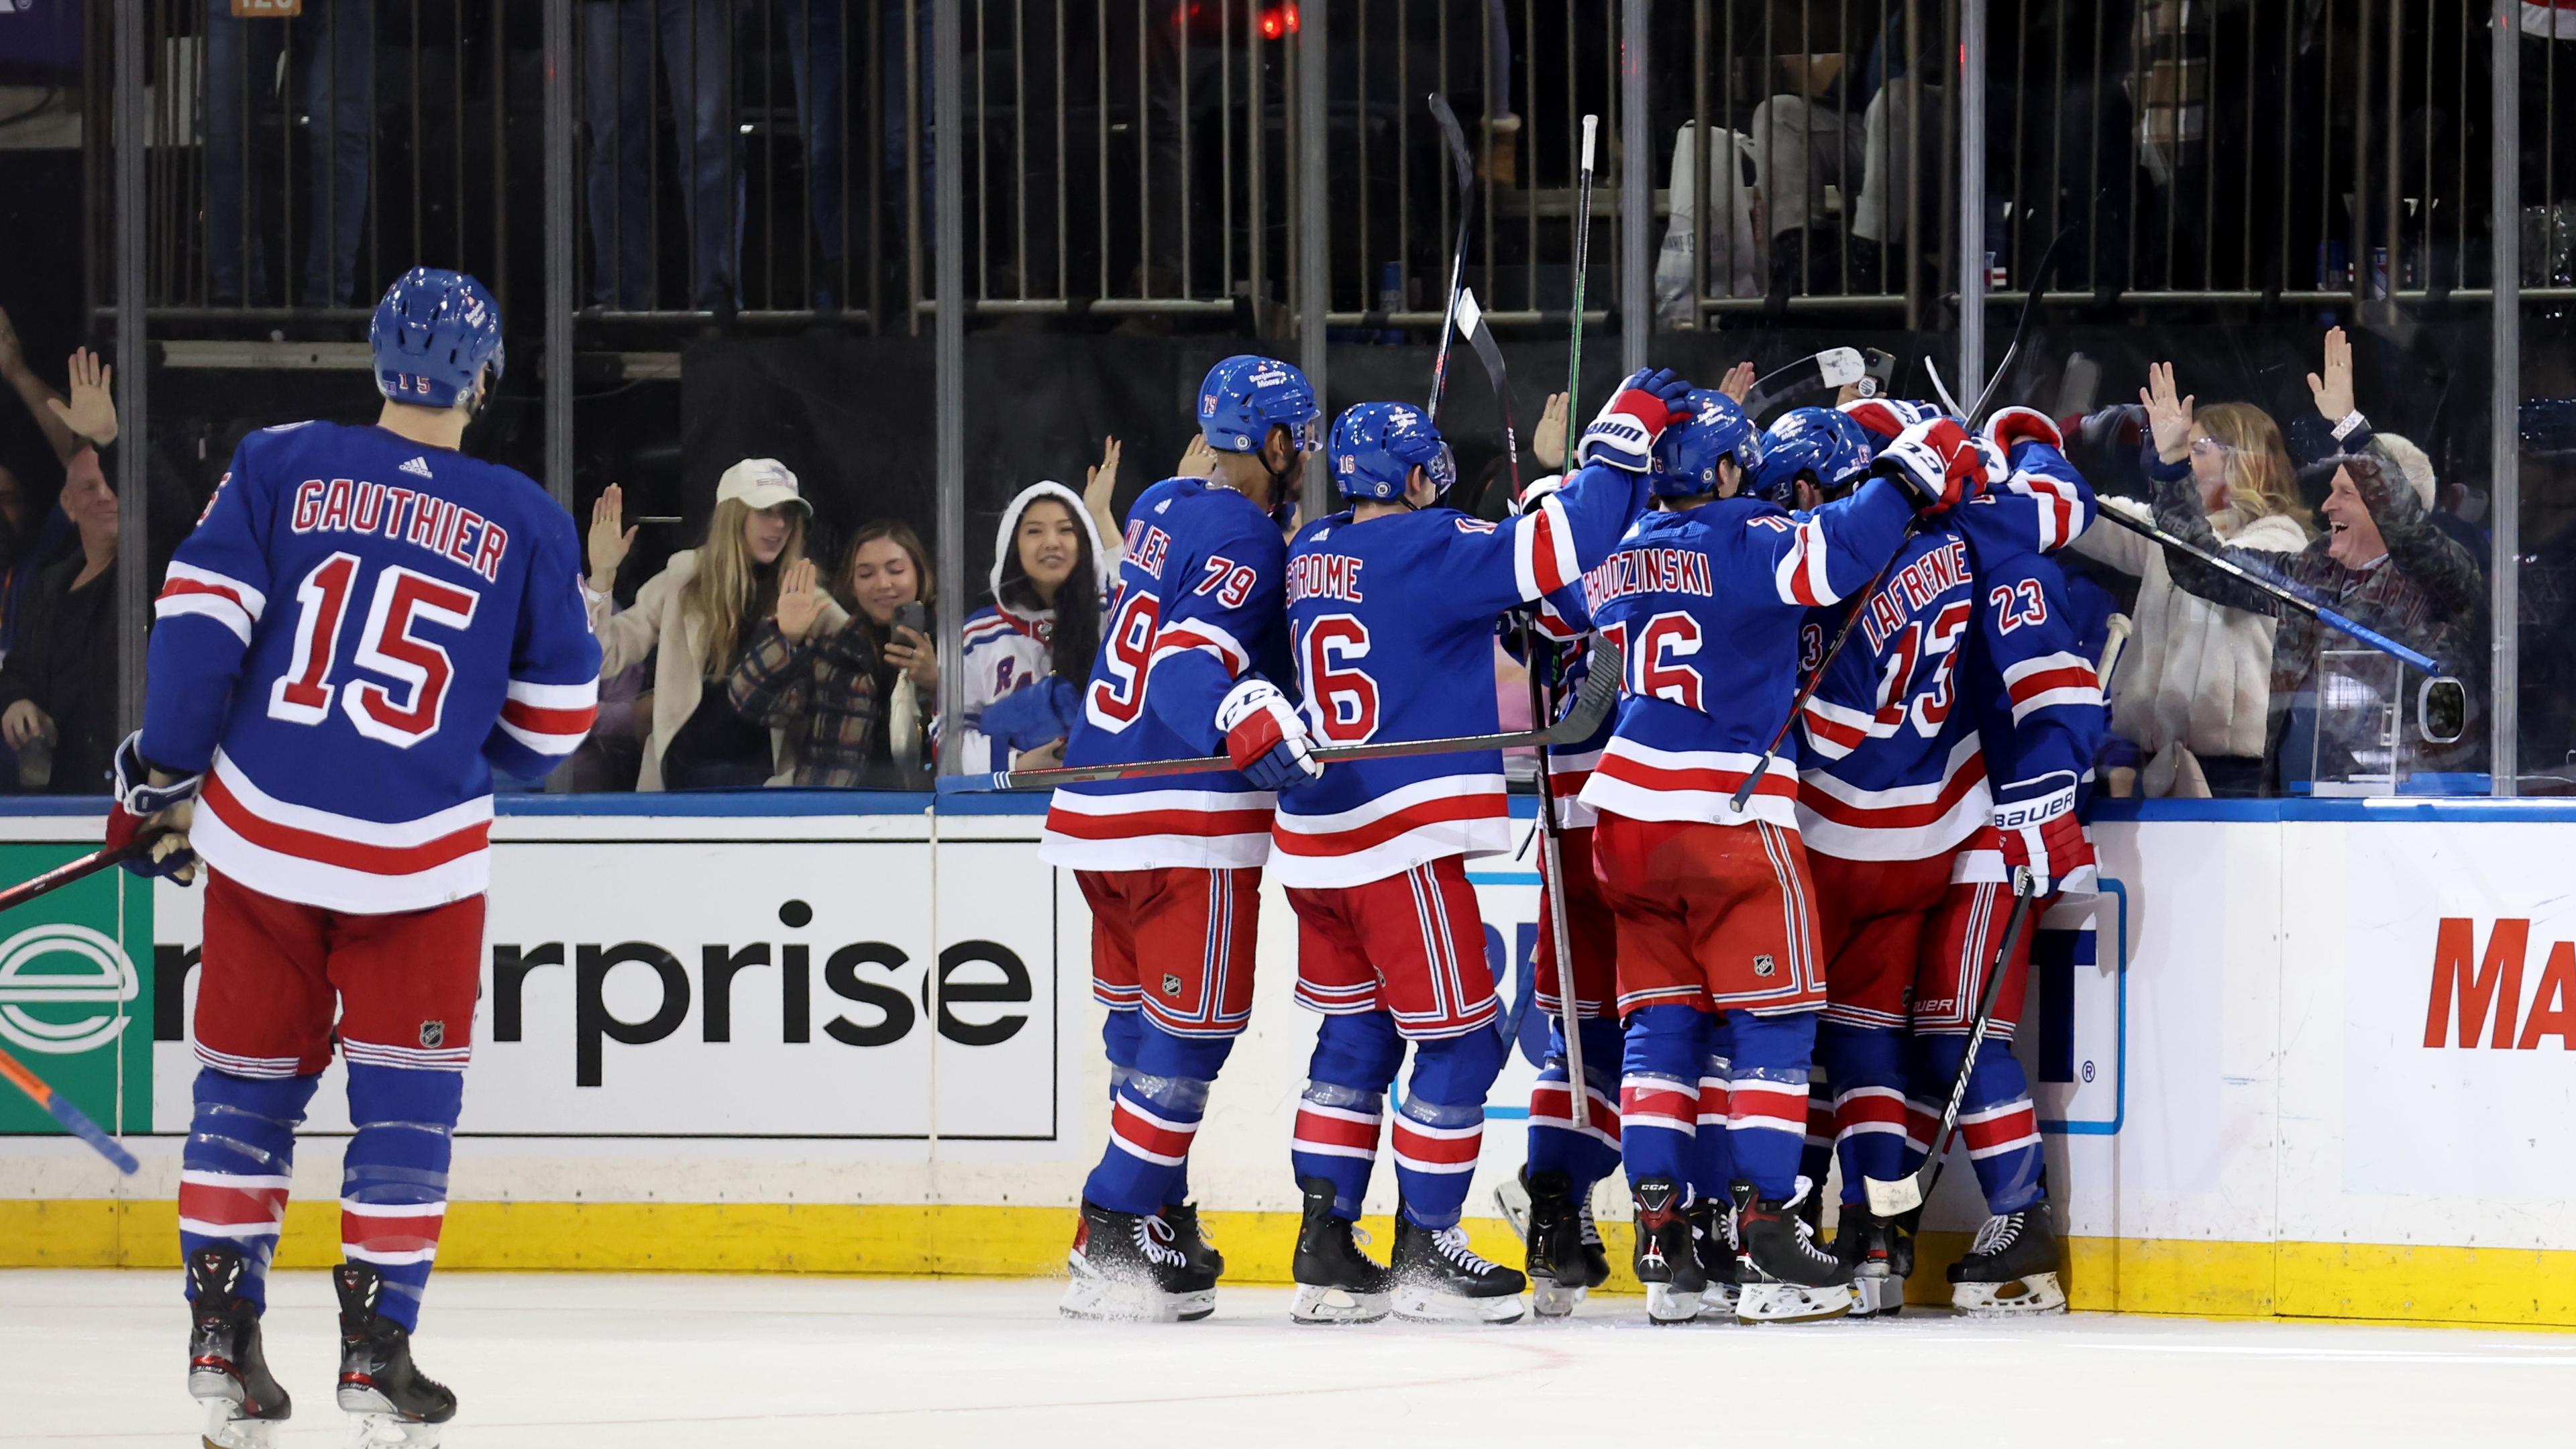 Mar 15, 2022; New York, New York, USA; New York Rangers defenseman Adam Fox (23) celebrates his game winning goal against the Anaheim Ducks with teammates during overtime at Madison Square Garden / Brad Penner-USA TODAY Sports